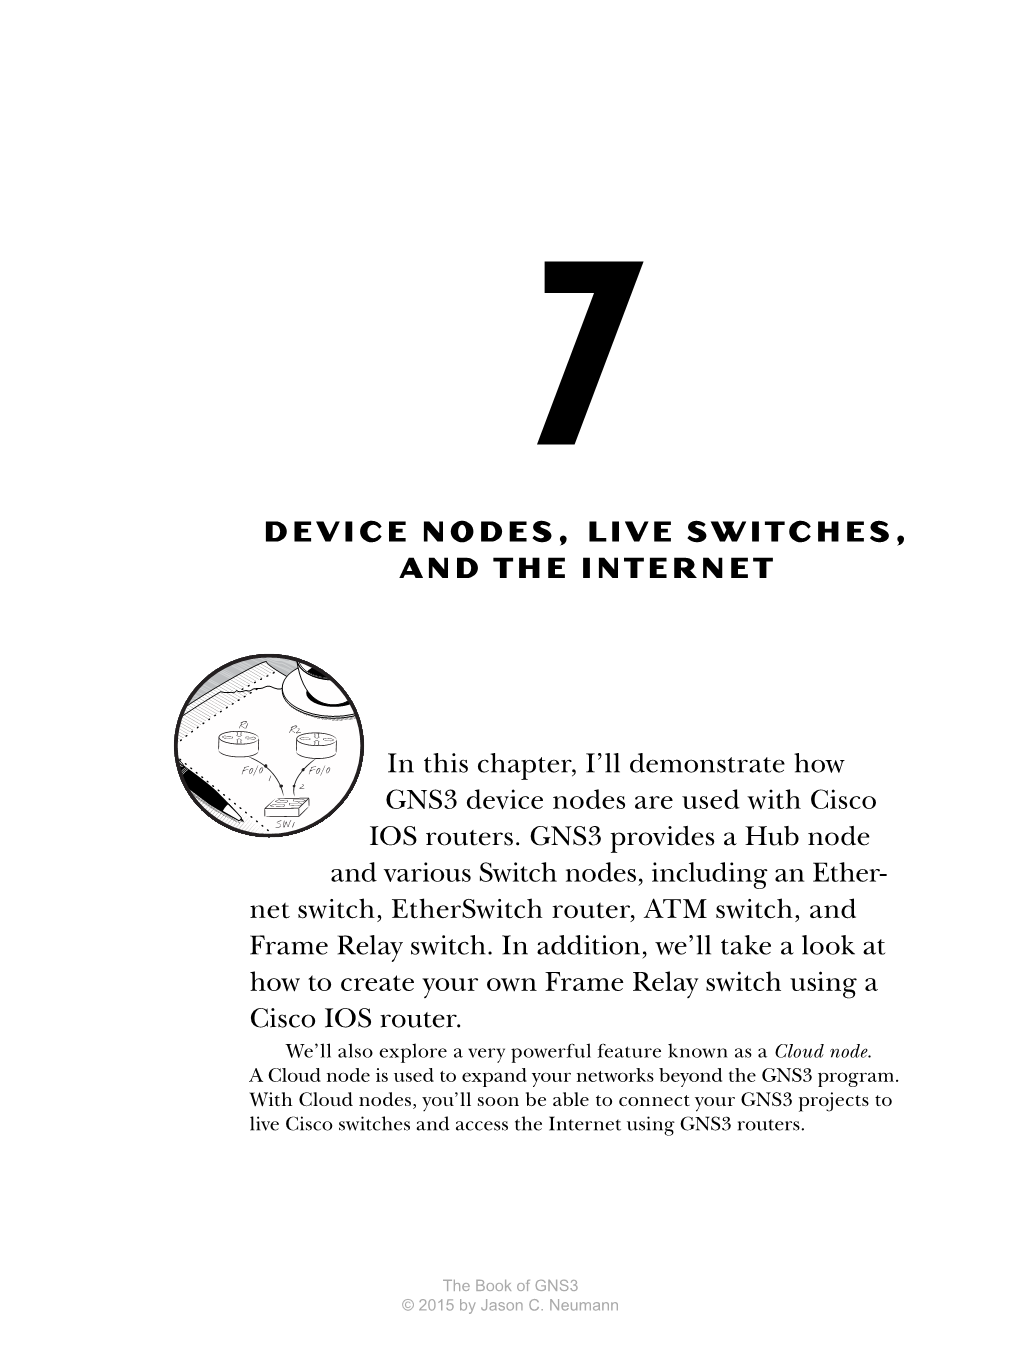 Device Nodes, Live Switches, and the Internet